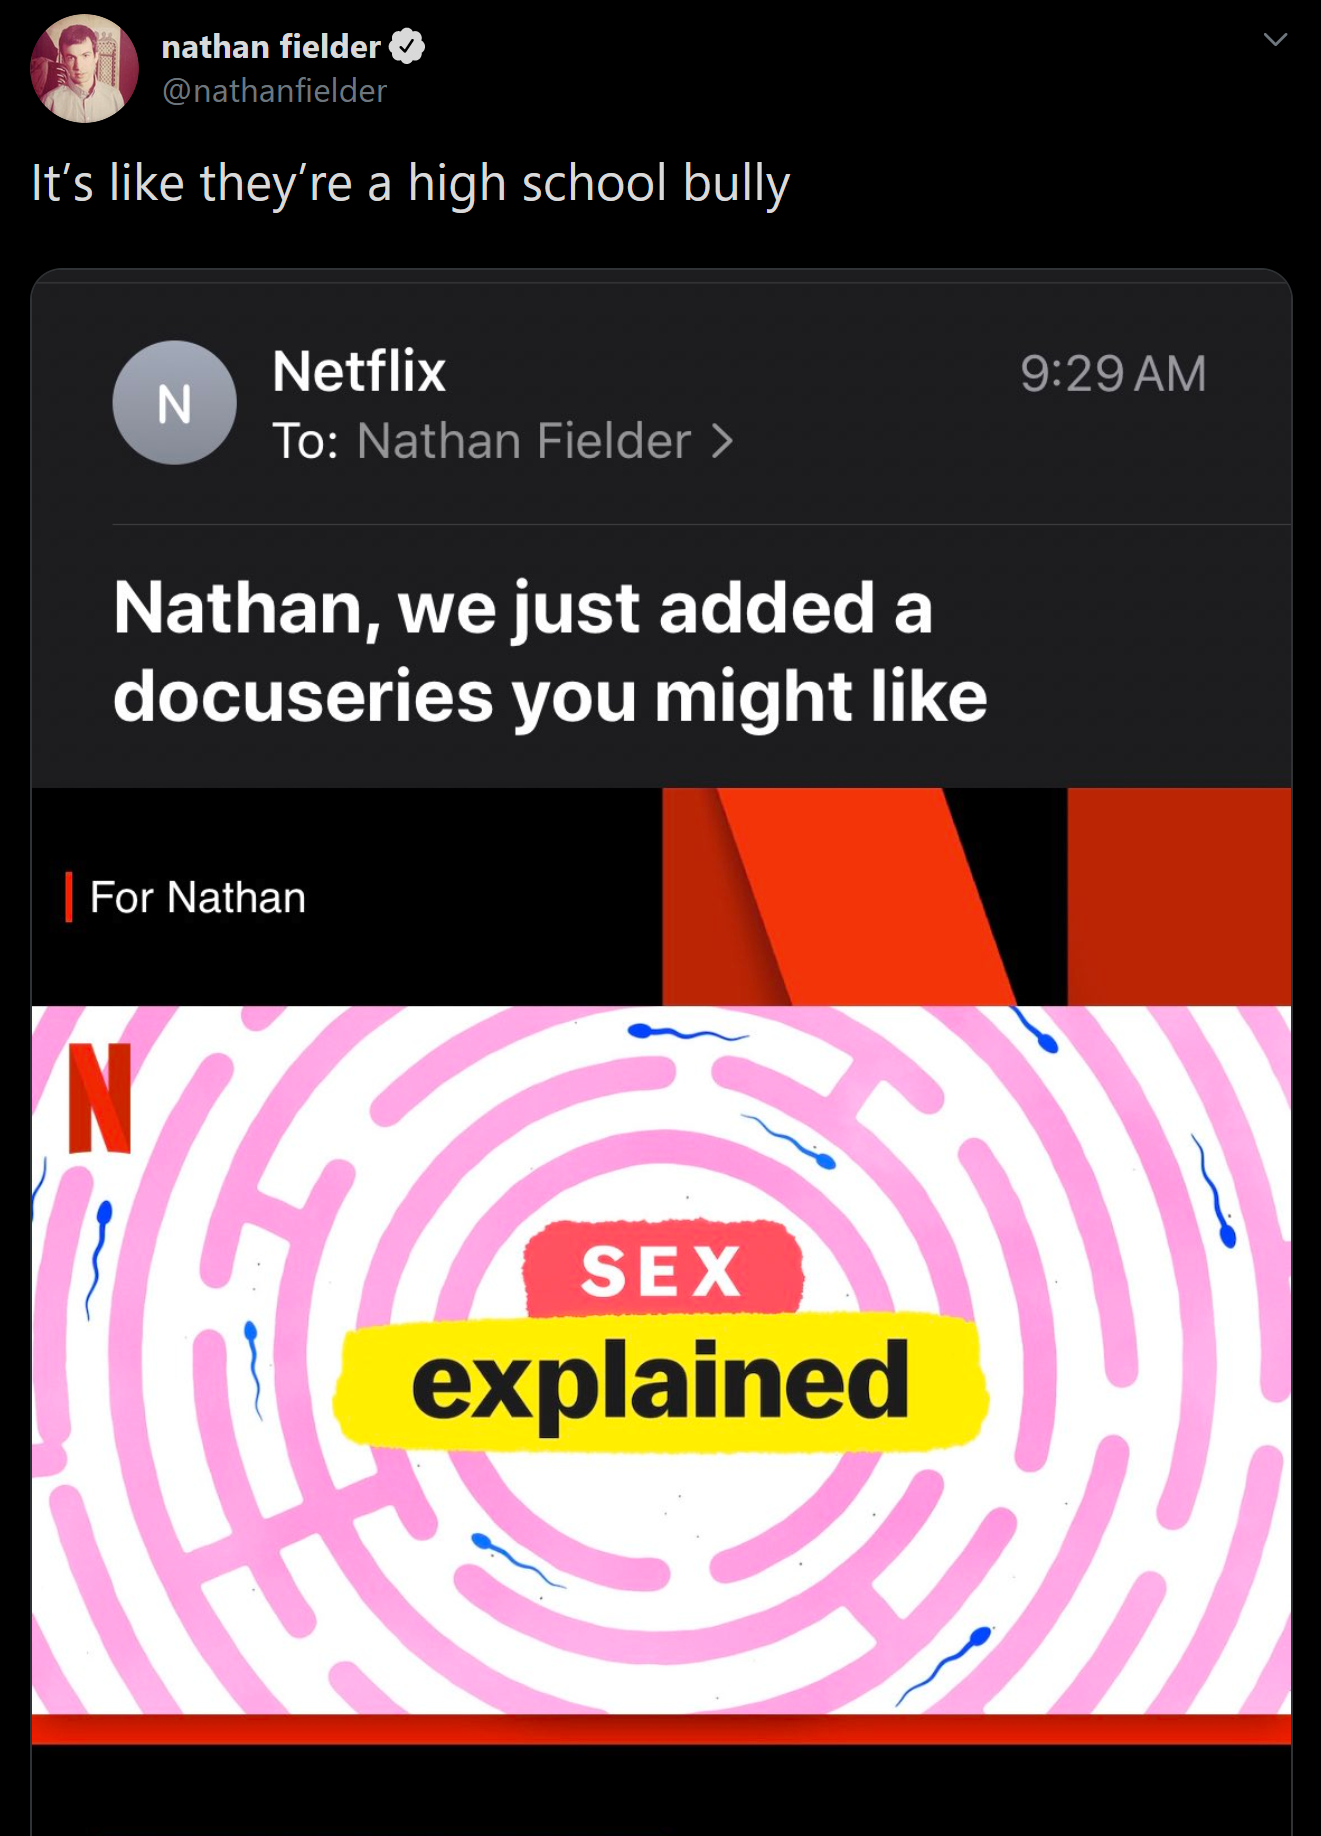 screenshot - nathan fielder nathanfielder It's they're a high school bully Netflix To Nathan Fielder > Nathan, we just added a docuseries you might For Nathan Sex explained